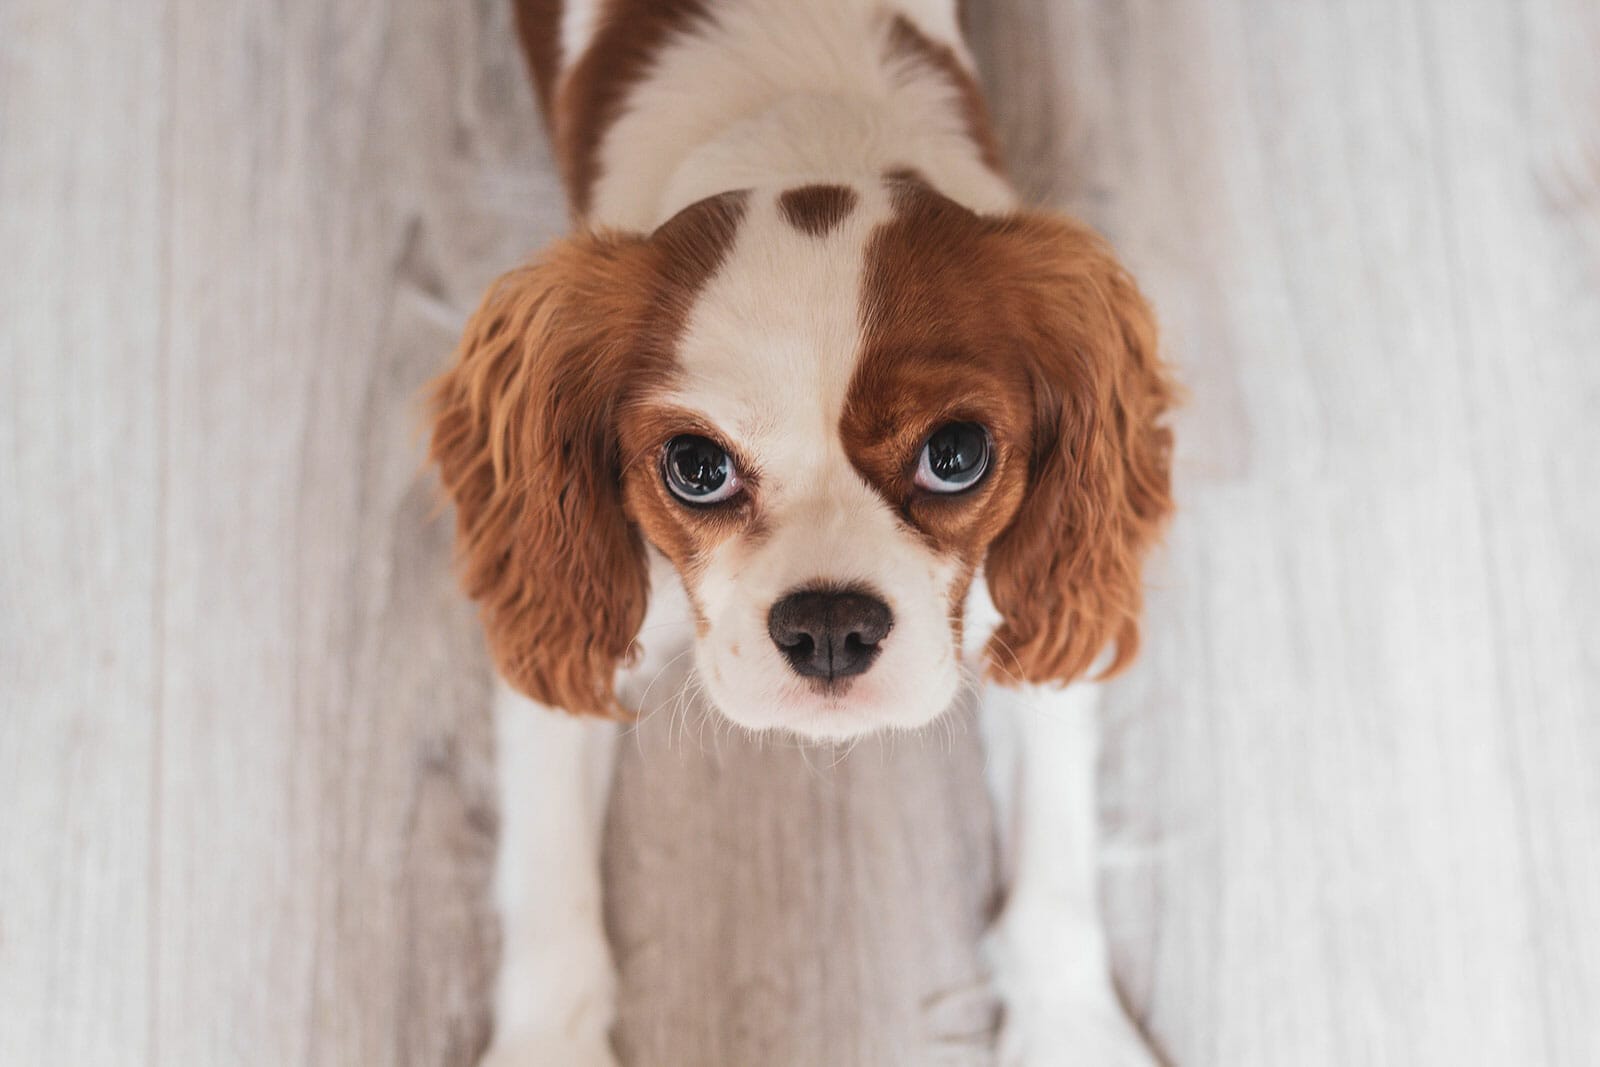 Cavalier King Charles Spaniel with red and white coat looking up